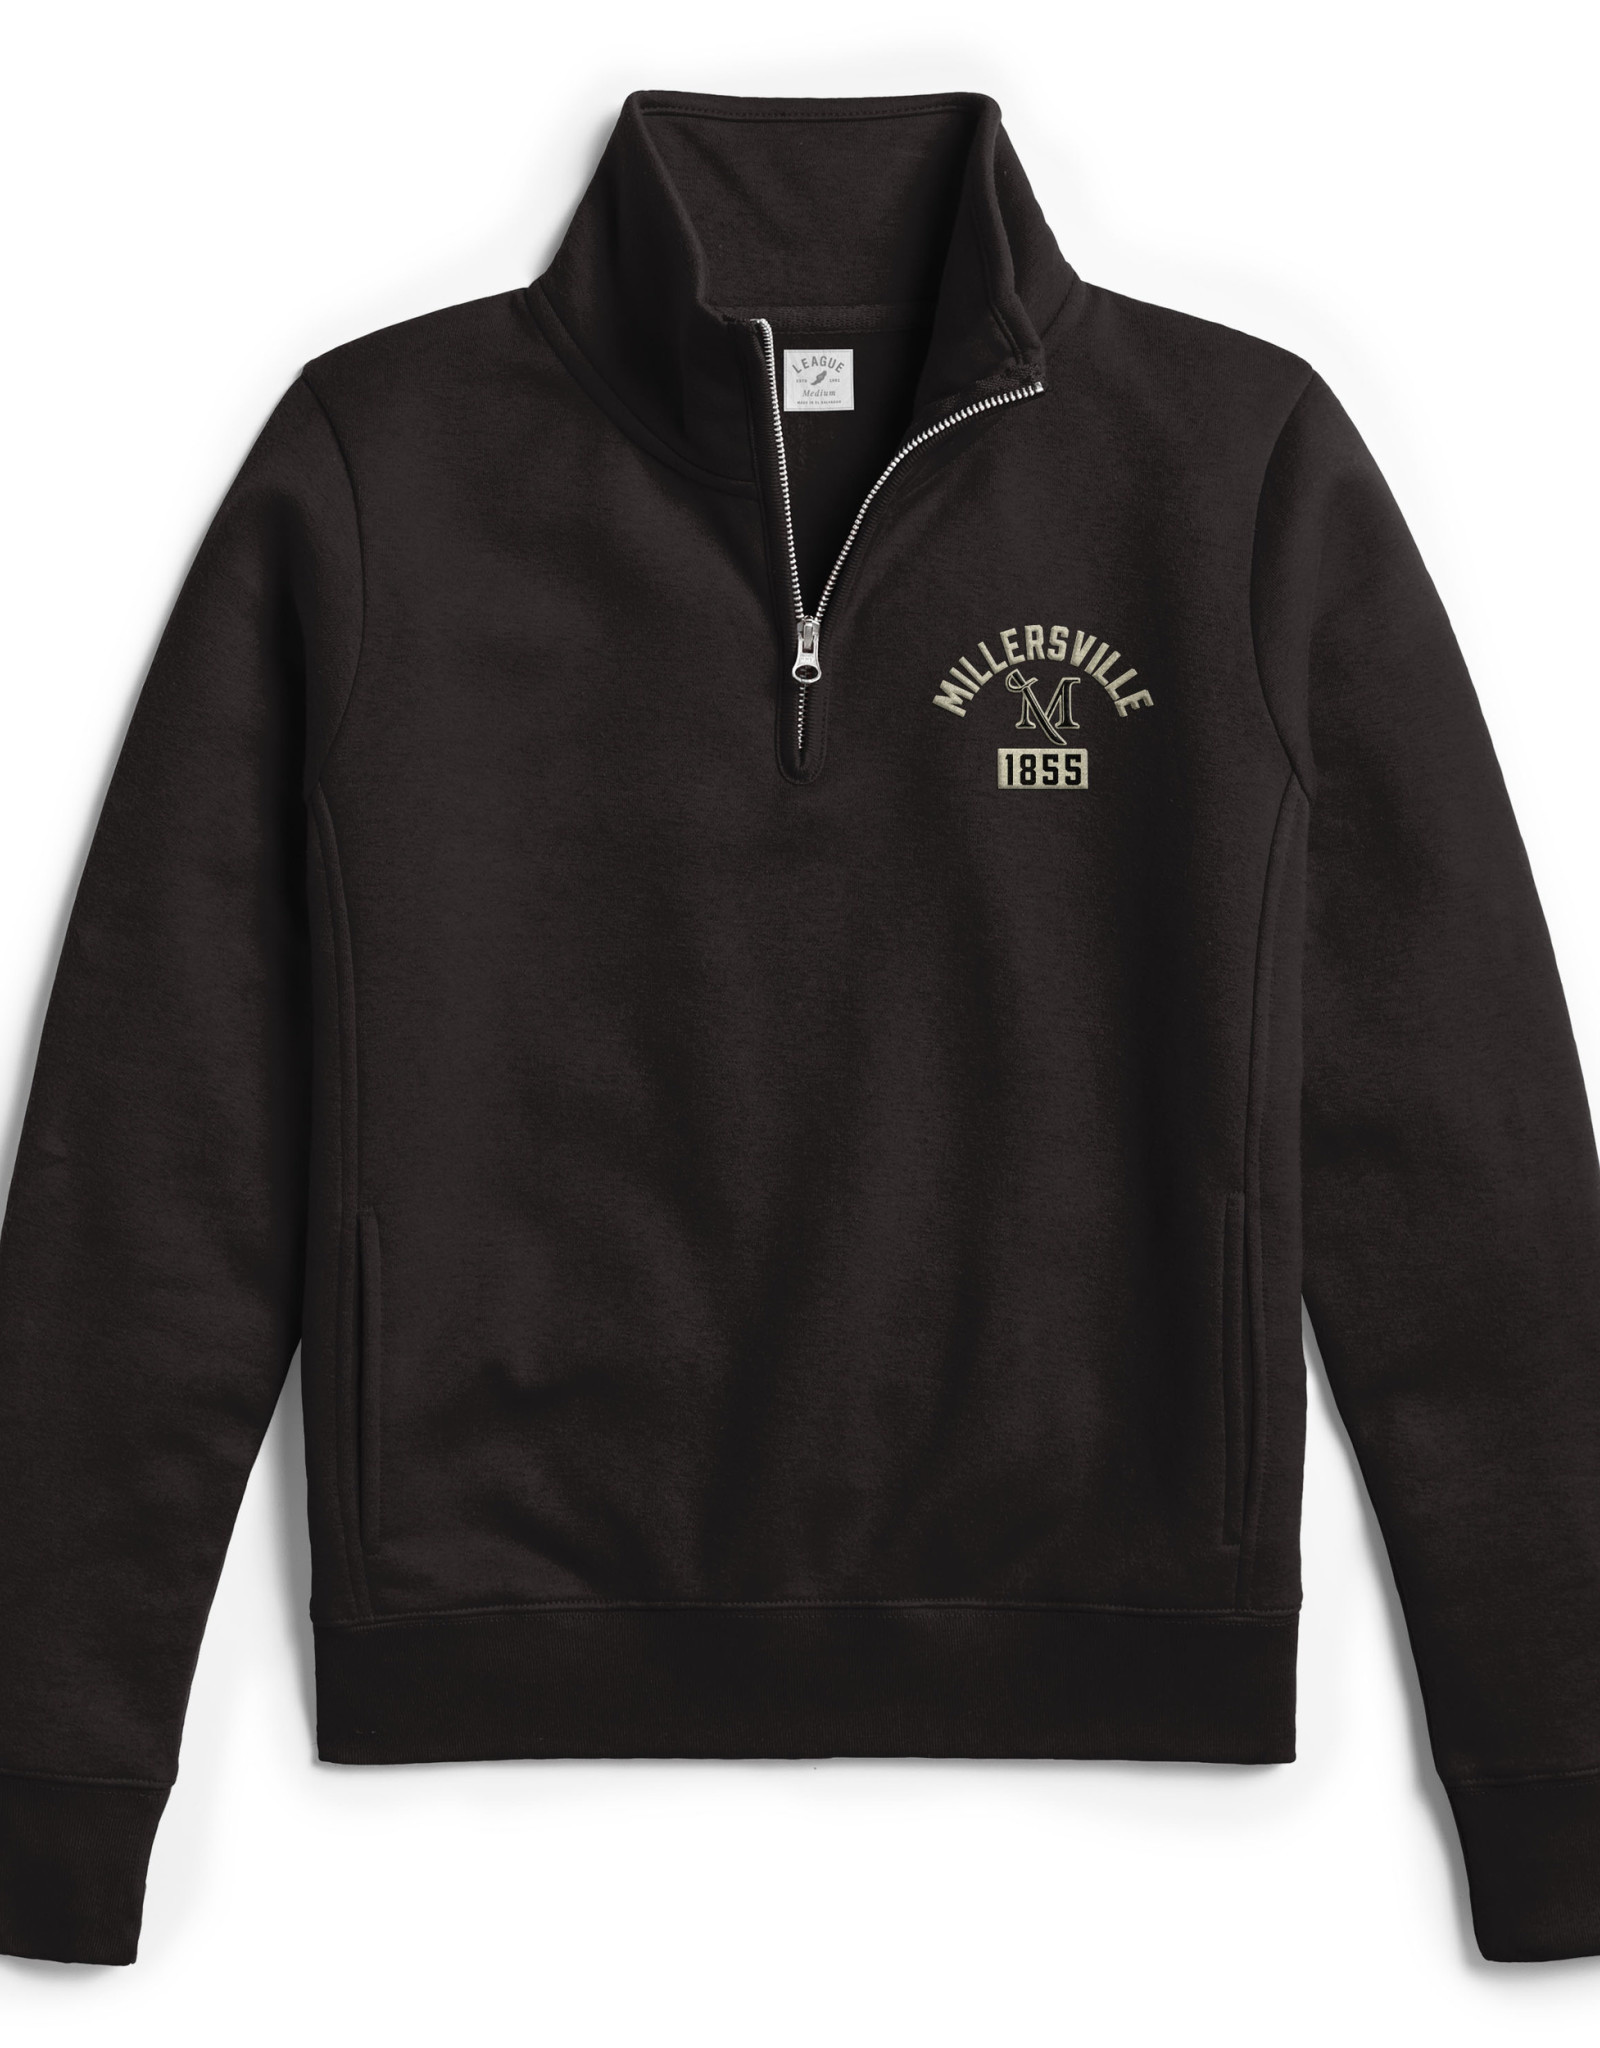 League Academy 1/4 Zip Black with Embroidery